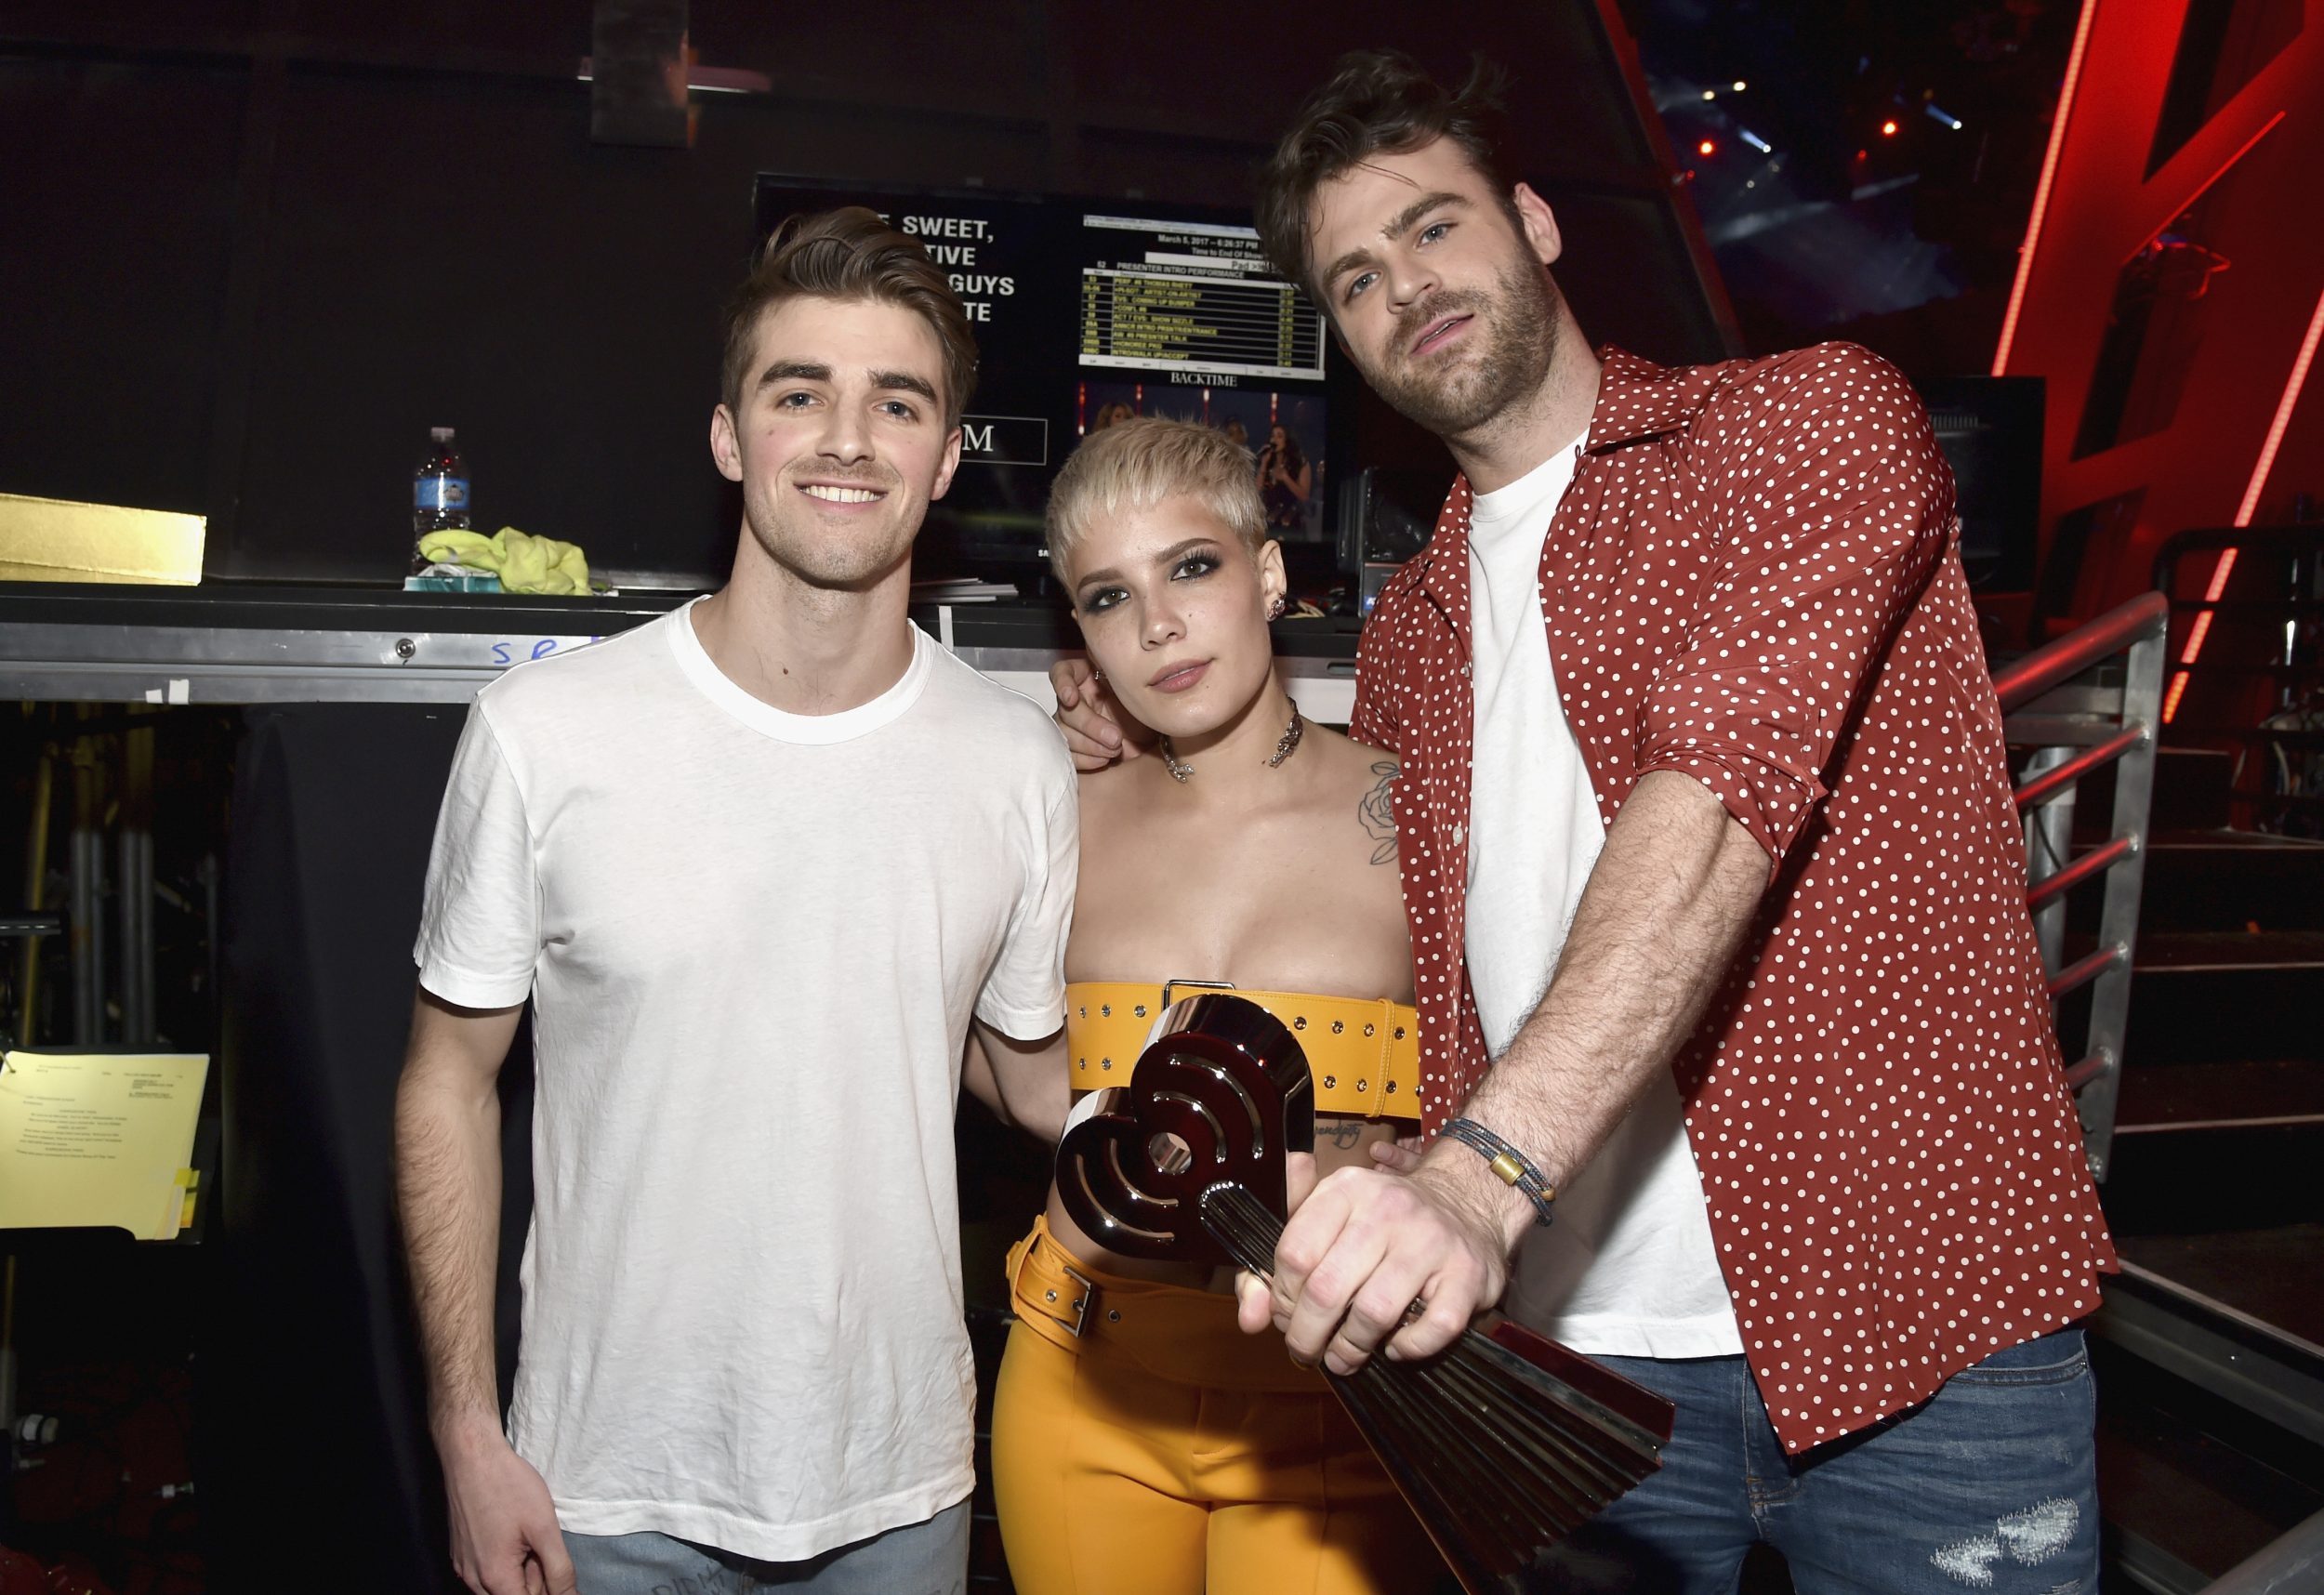 INGLEWOOD, CA - MARCH 05: DJs Drew Taggart (2nd L) and Alex Pall (R) of The Chainsmokers and singer Halsey (C), winners of Dance Song of the Year for 'Closer,' at the 2017 iHeartRadio Music Awards which broadcast live on Turner's TBS, TNT, and truTV at The Forum on March 5, 2017 in Inglewood, California. (Photo by Frazer Harrison/Getty Images for iHeartMedia) *** Local Caption *** Drew Taggart; Alex Pall; Halsey